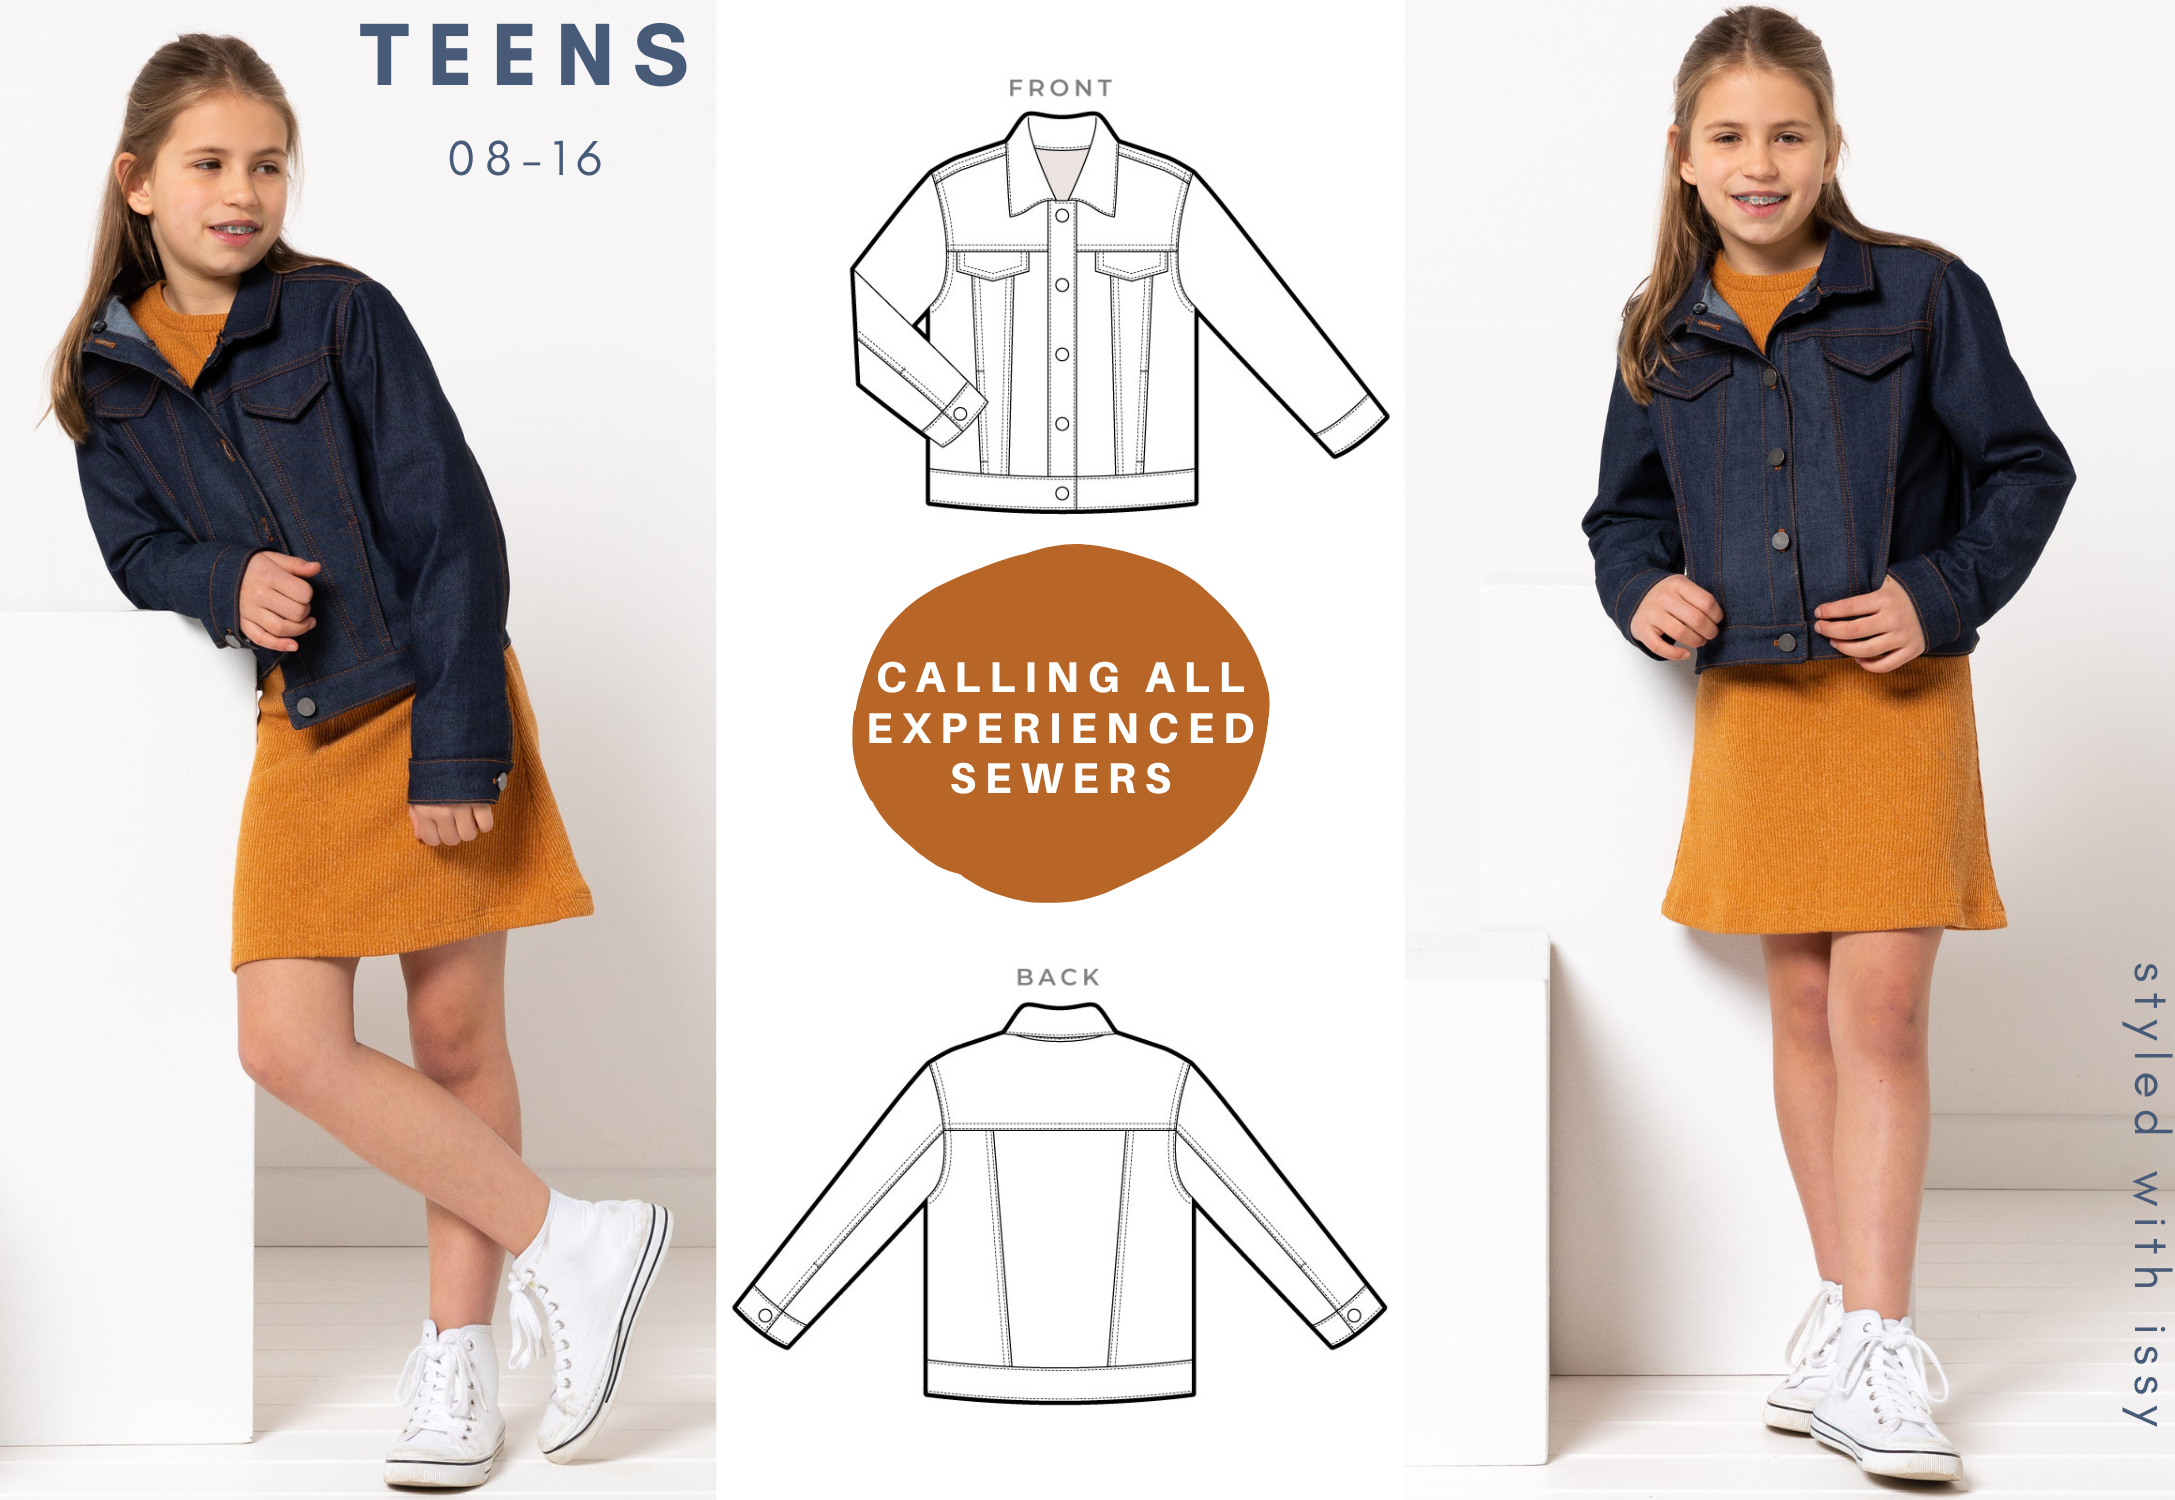 Style Arc's latest pattern release: Charlie Teens Jacket - available to purchase in Kids sizing 02-08 or Teens sizing -8-16